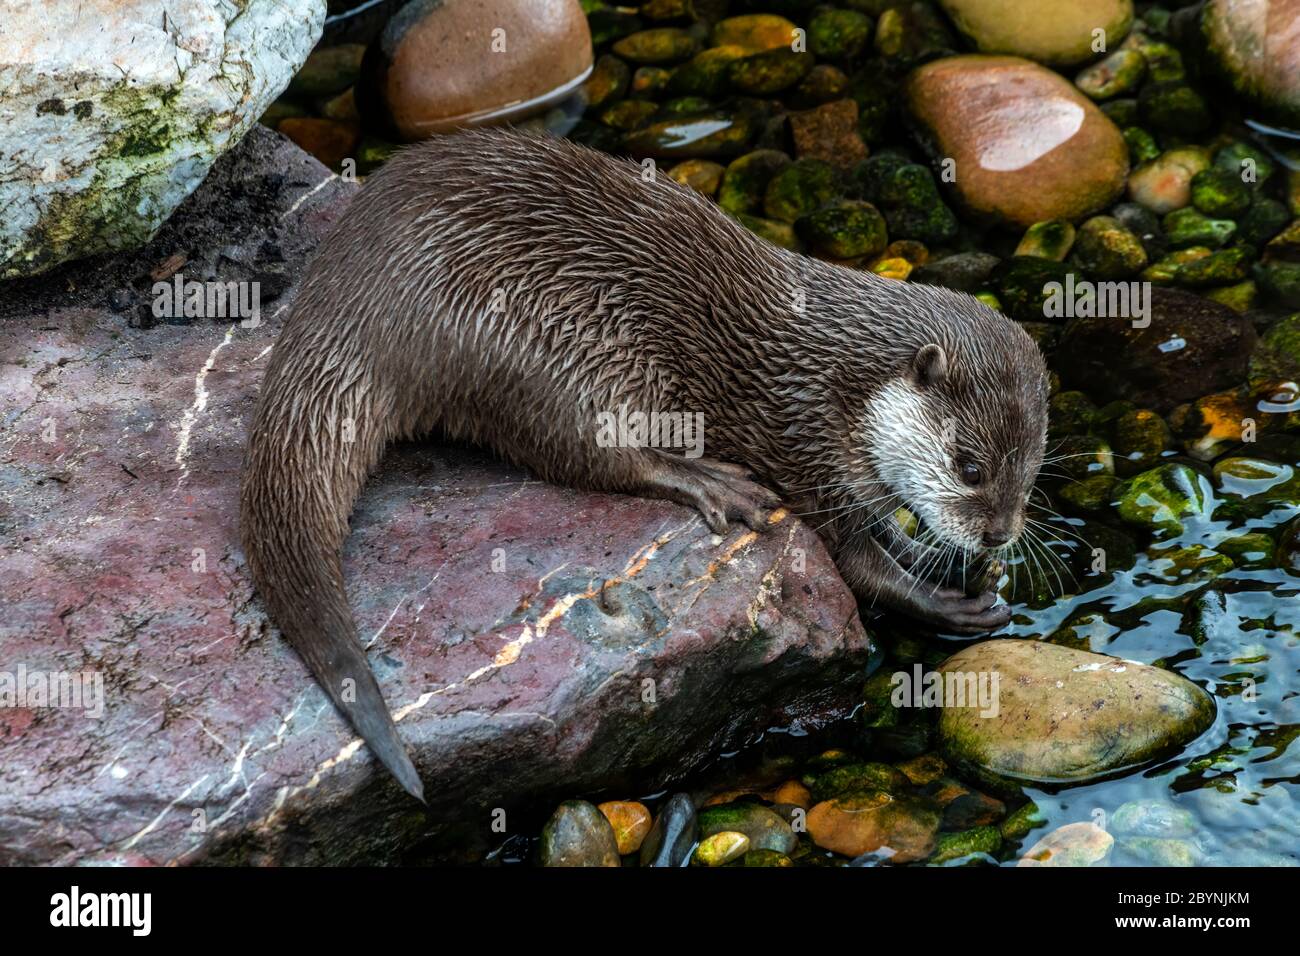 Asian Short Clawed Otter (Amblonyx cinerea) feeding at a river it is now and endangered species stock photo Stock Photo